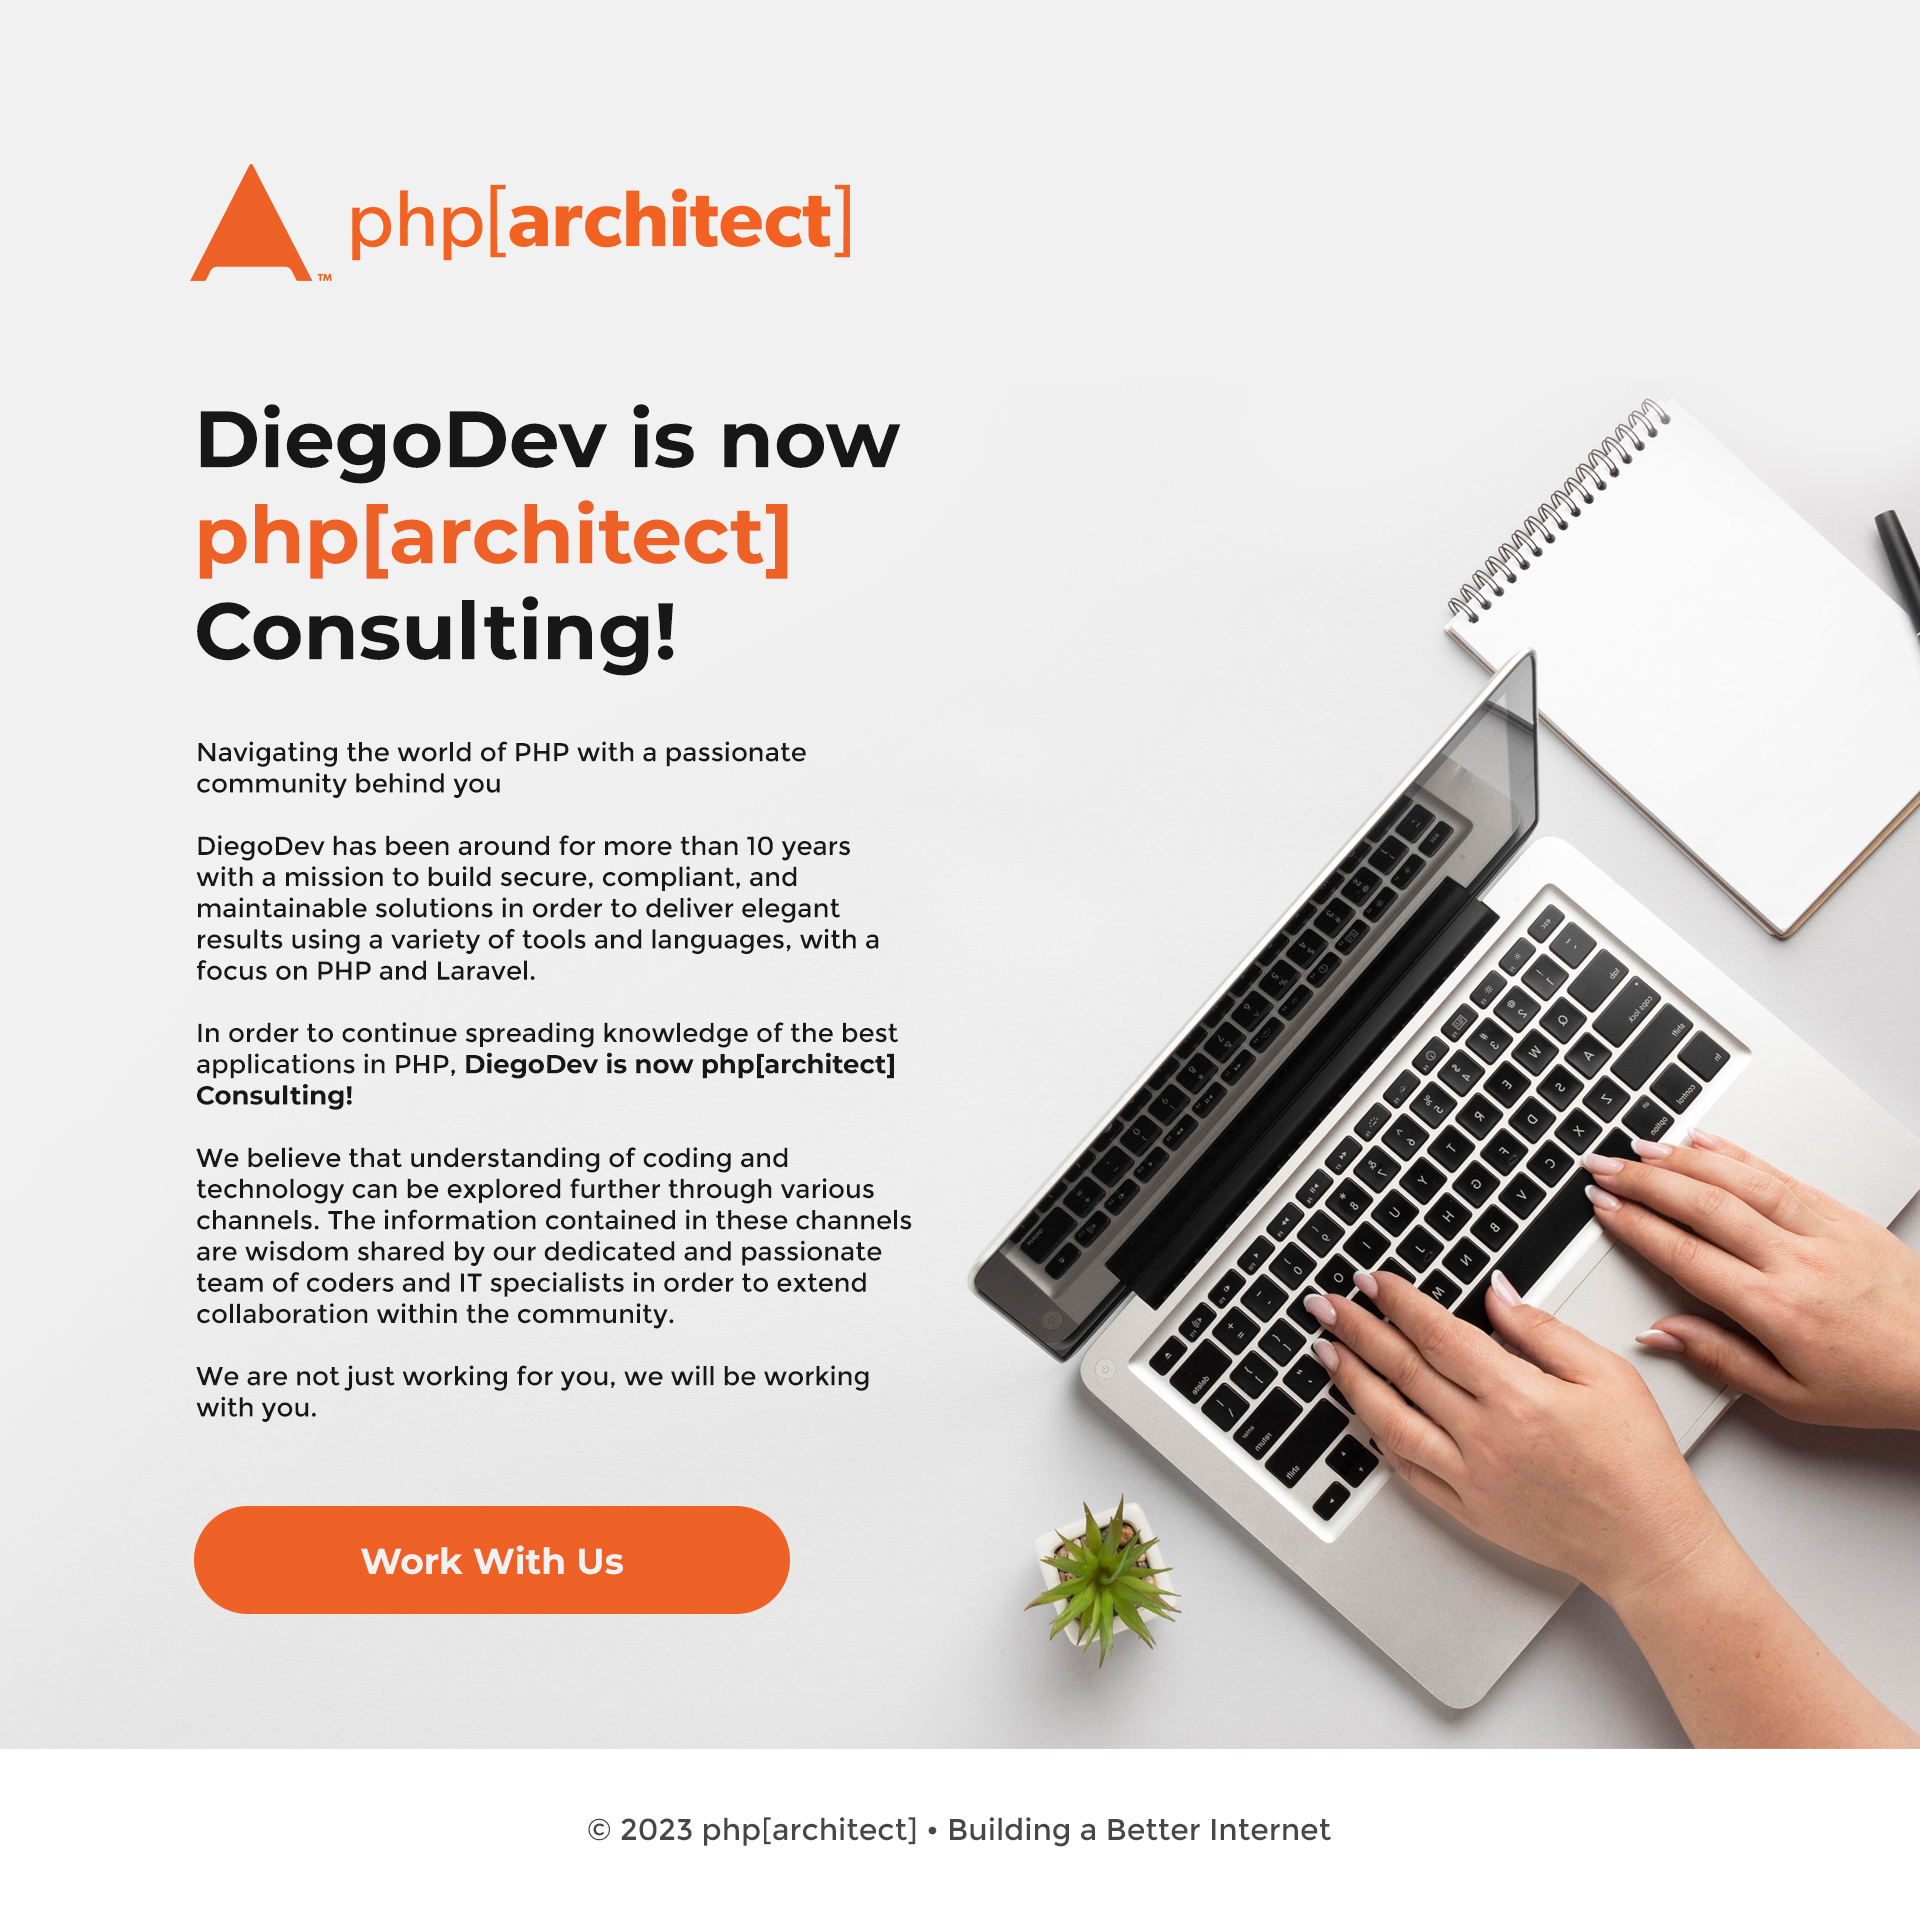 DiegoDev is now php[architect] Consulting